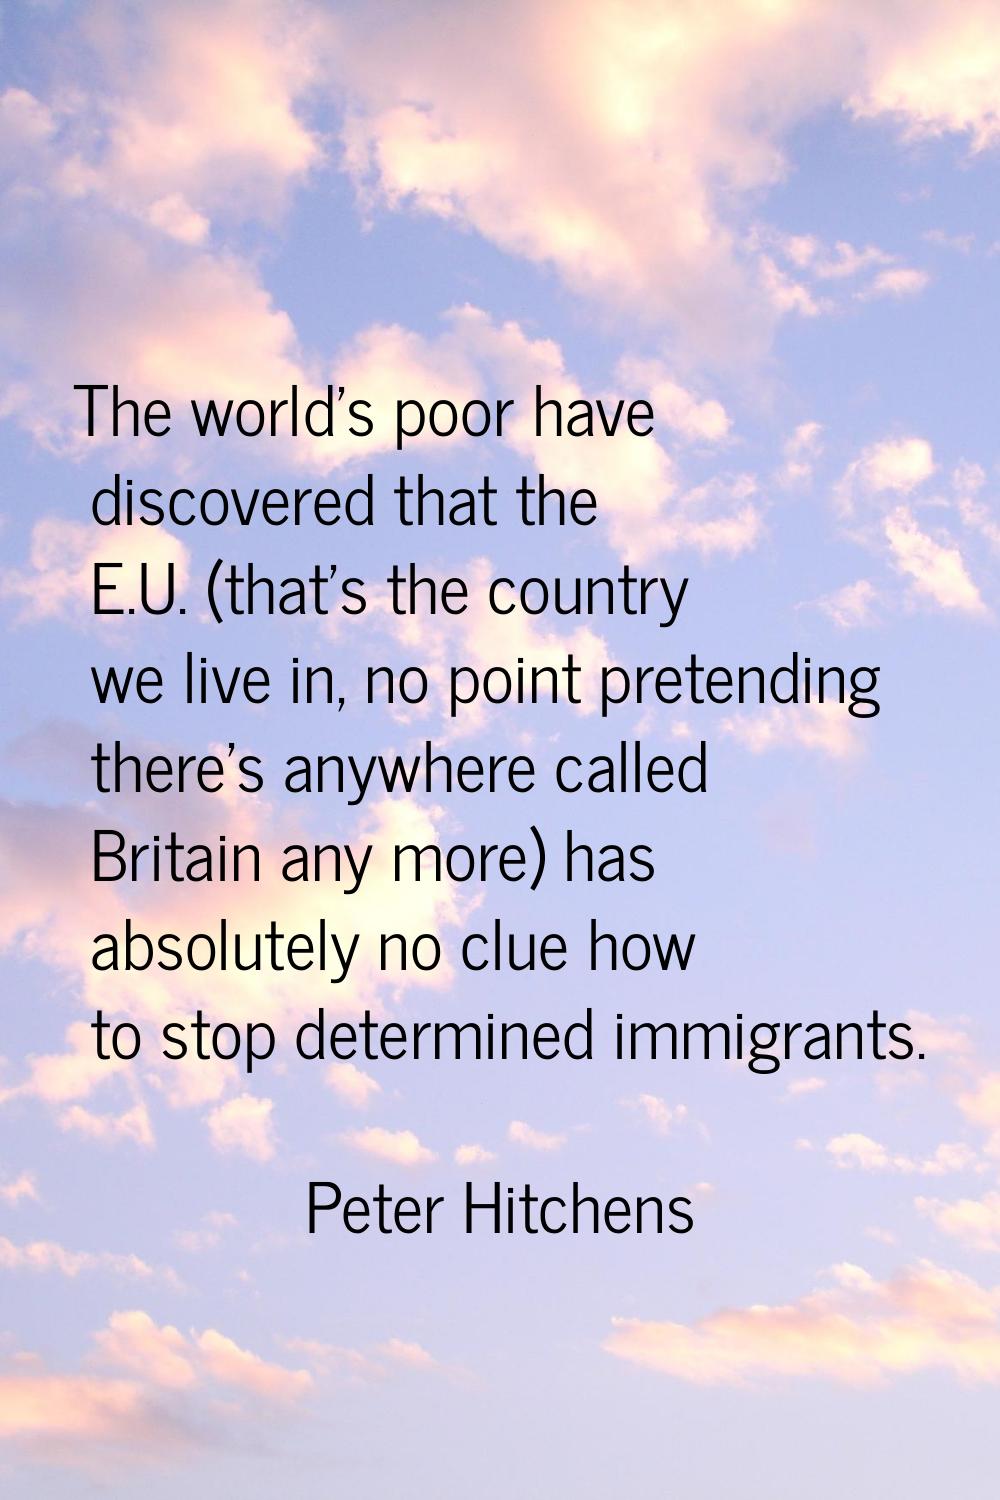 The world's poor have discovered that the E.U. (that's the country we live in, no point pretending 